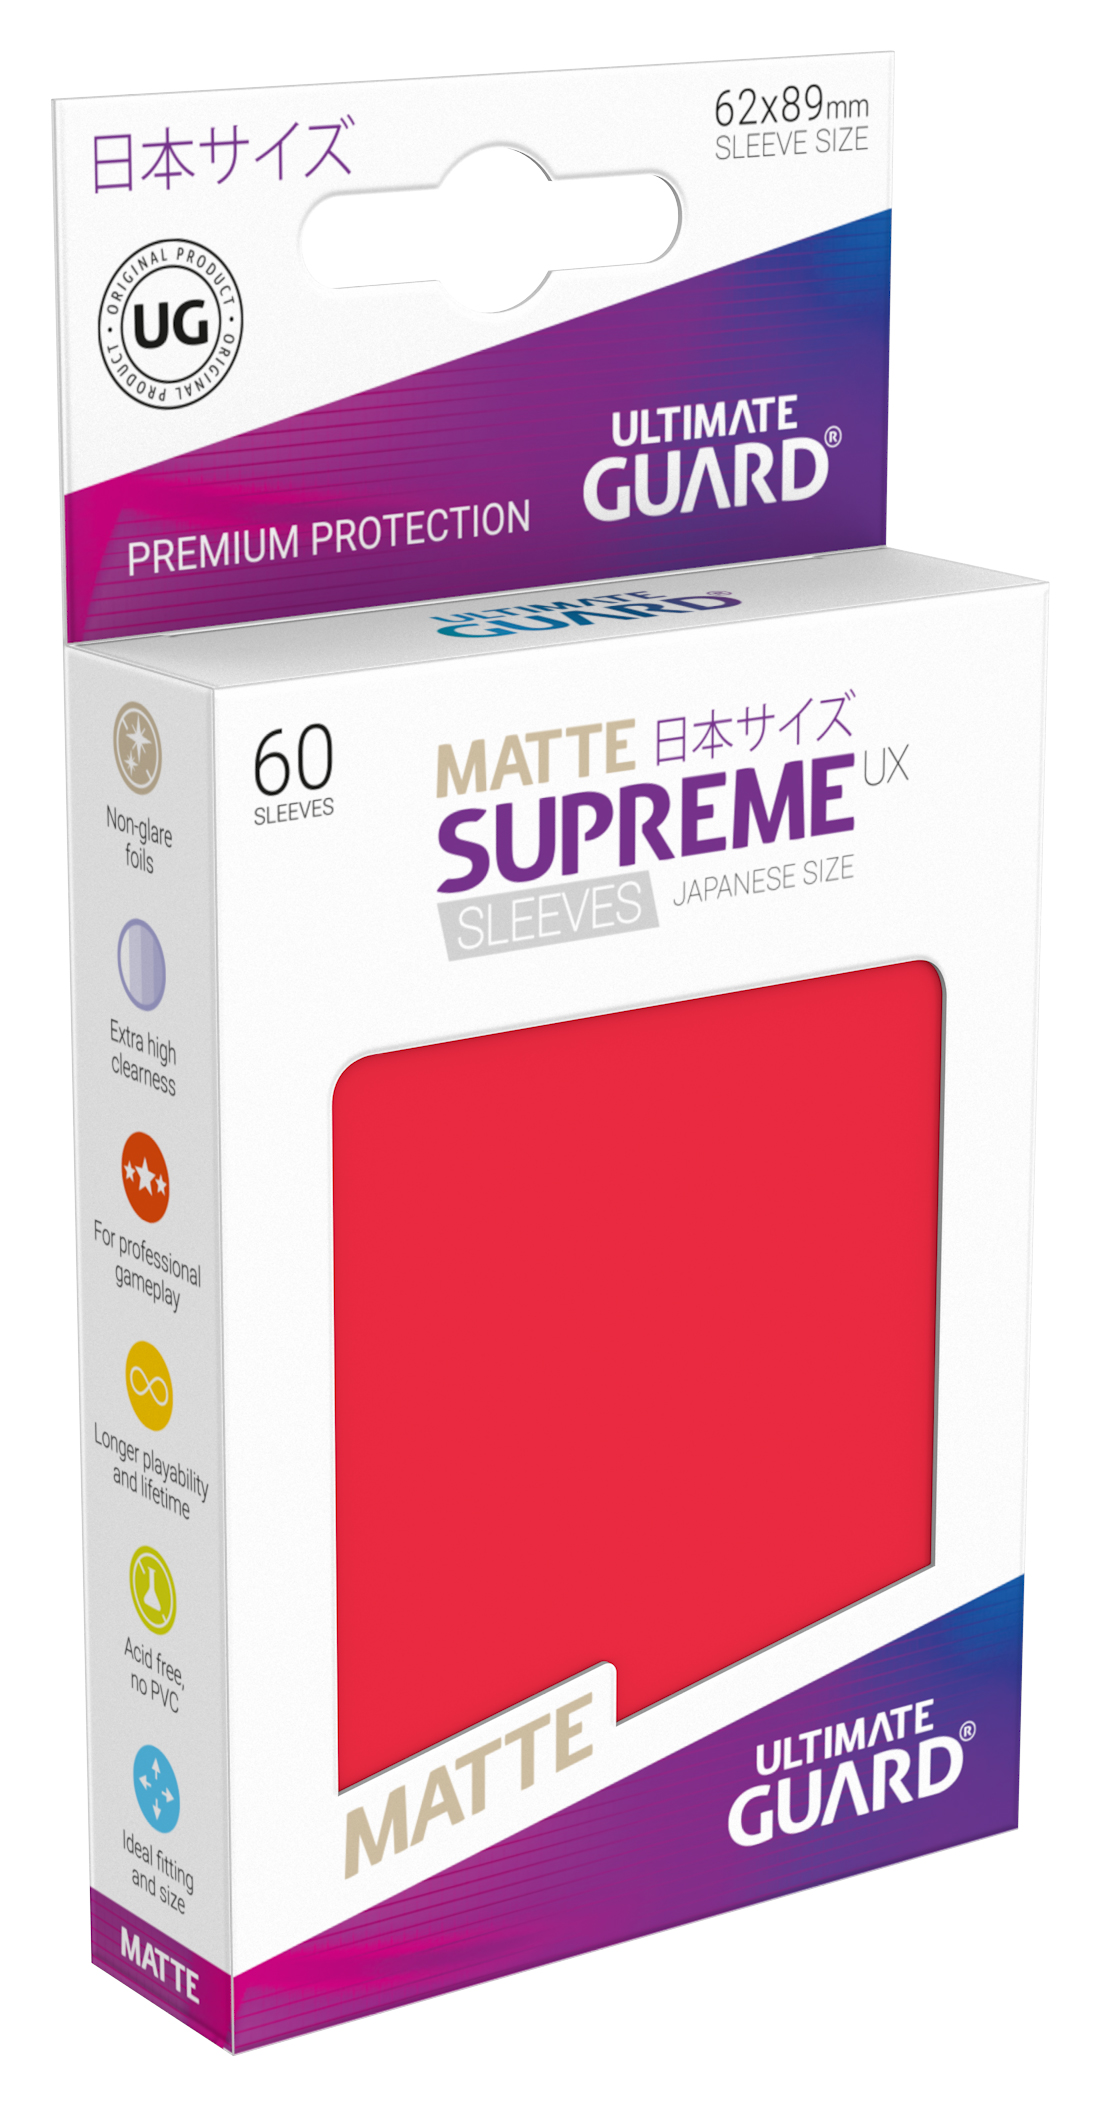 Matte LIGHT GREEN Ultimate Guard SUPREME UX Japanese Size Card Sleeves 60 